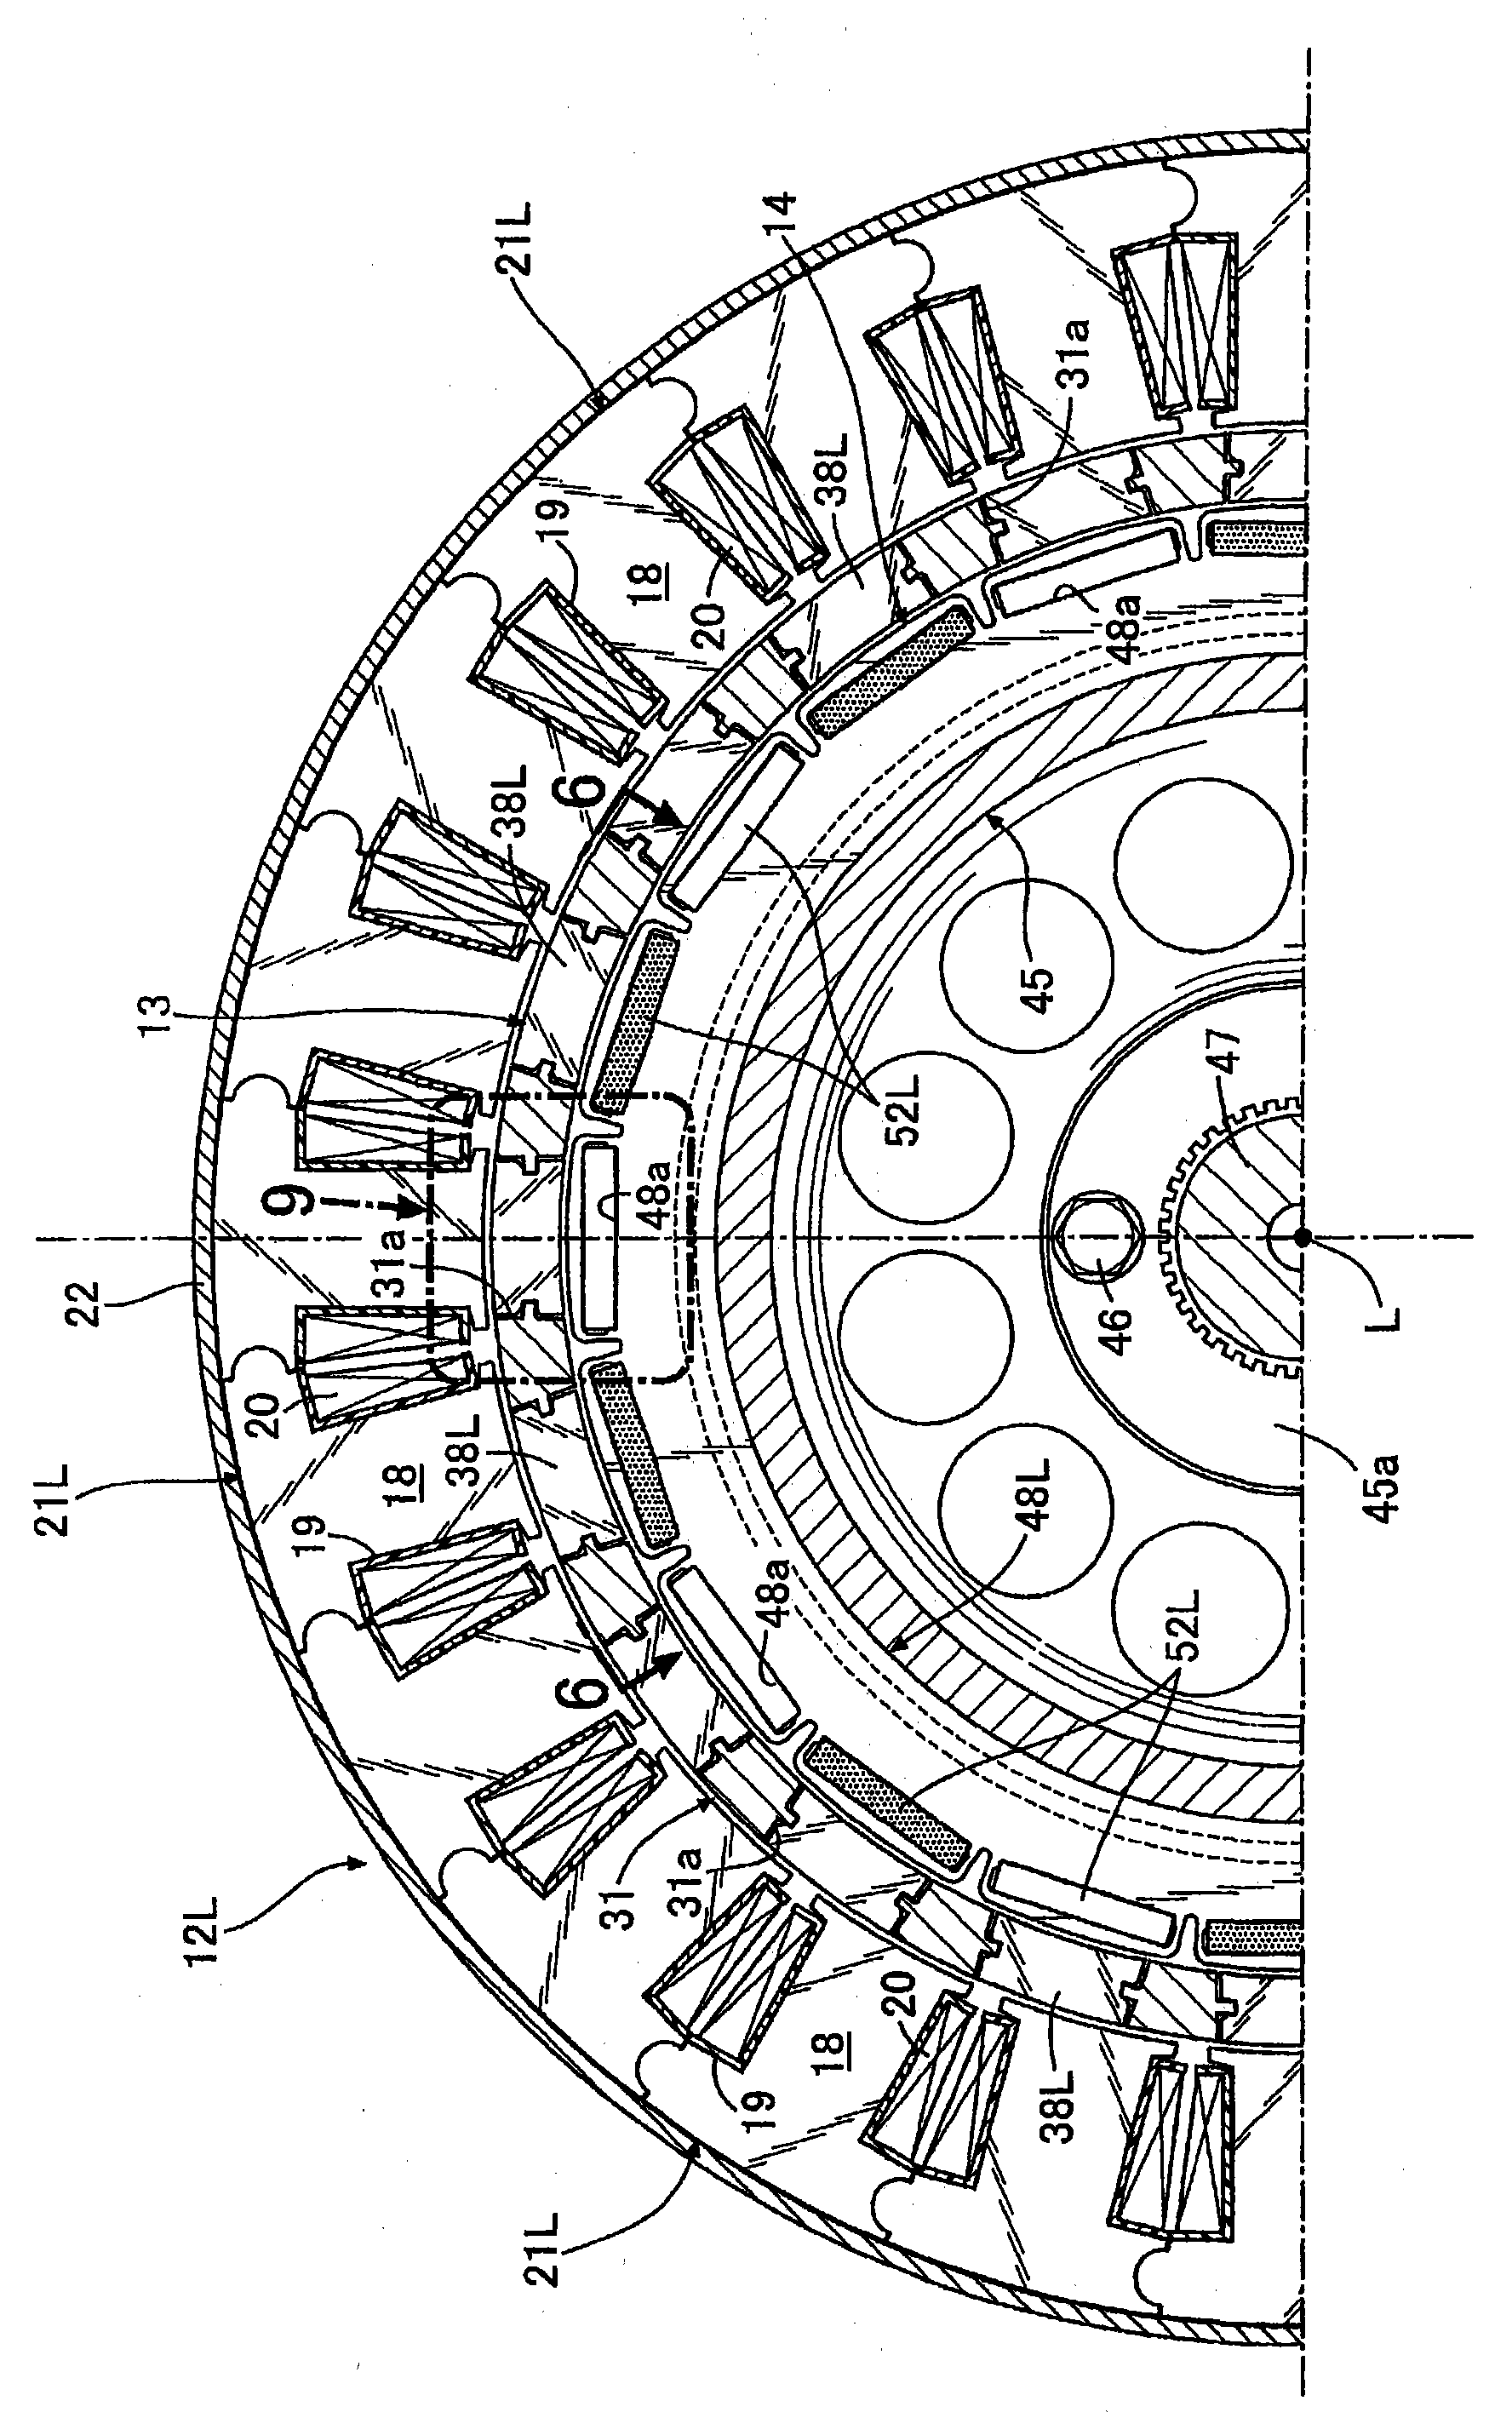 Motor and rotor for dynamo-electric machine